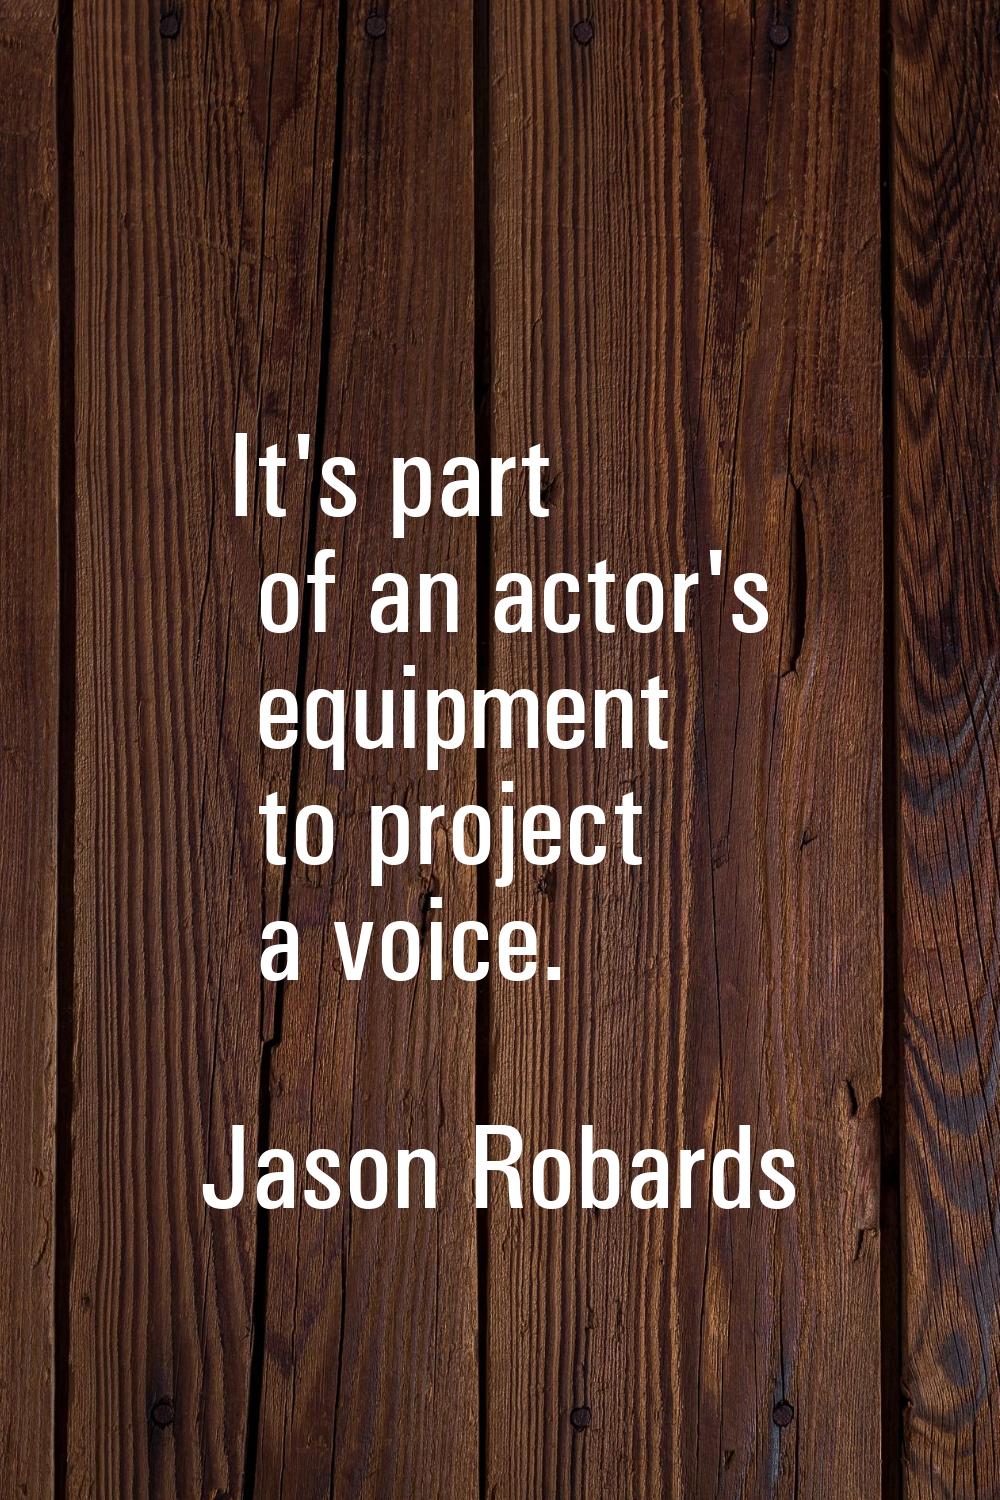 It's part of an actor's equipment to project a voice.